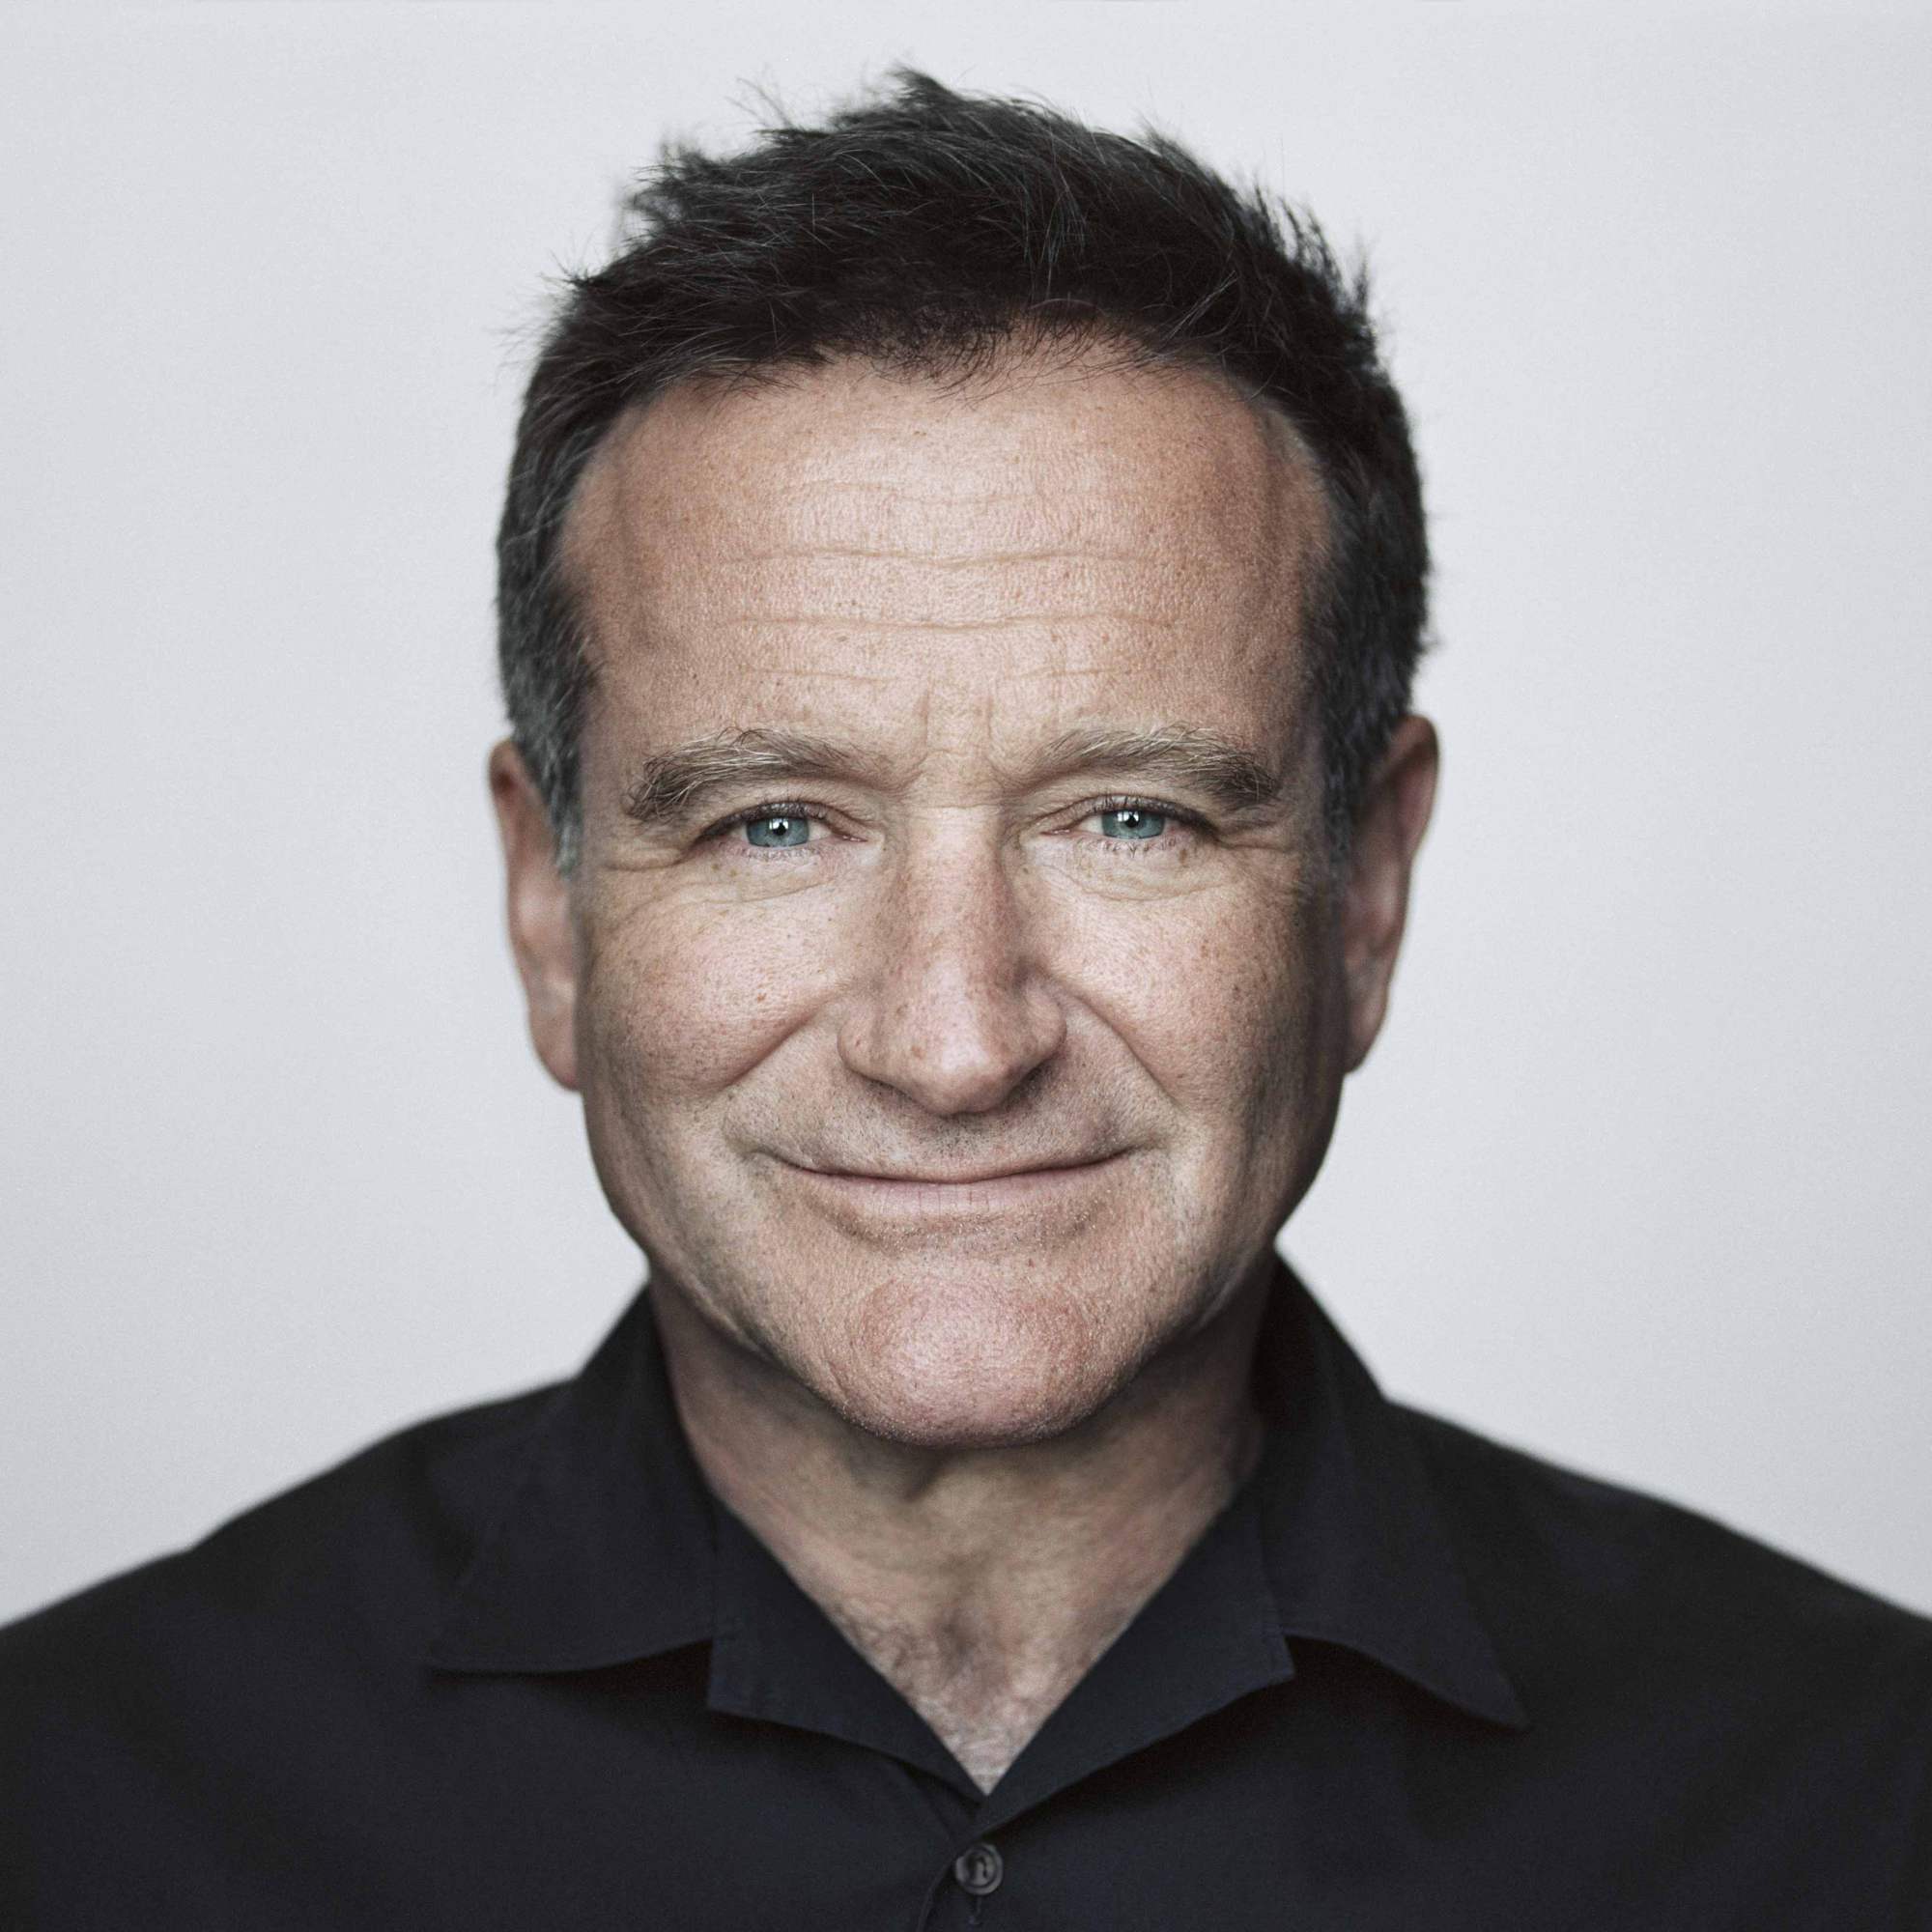 How tall is Robin Williams?